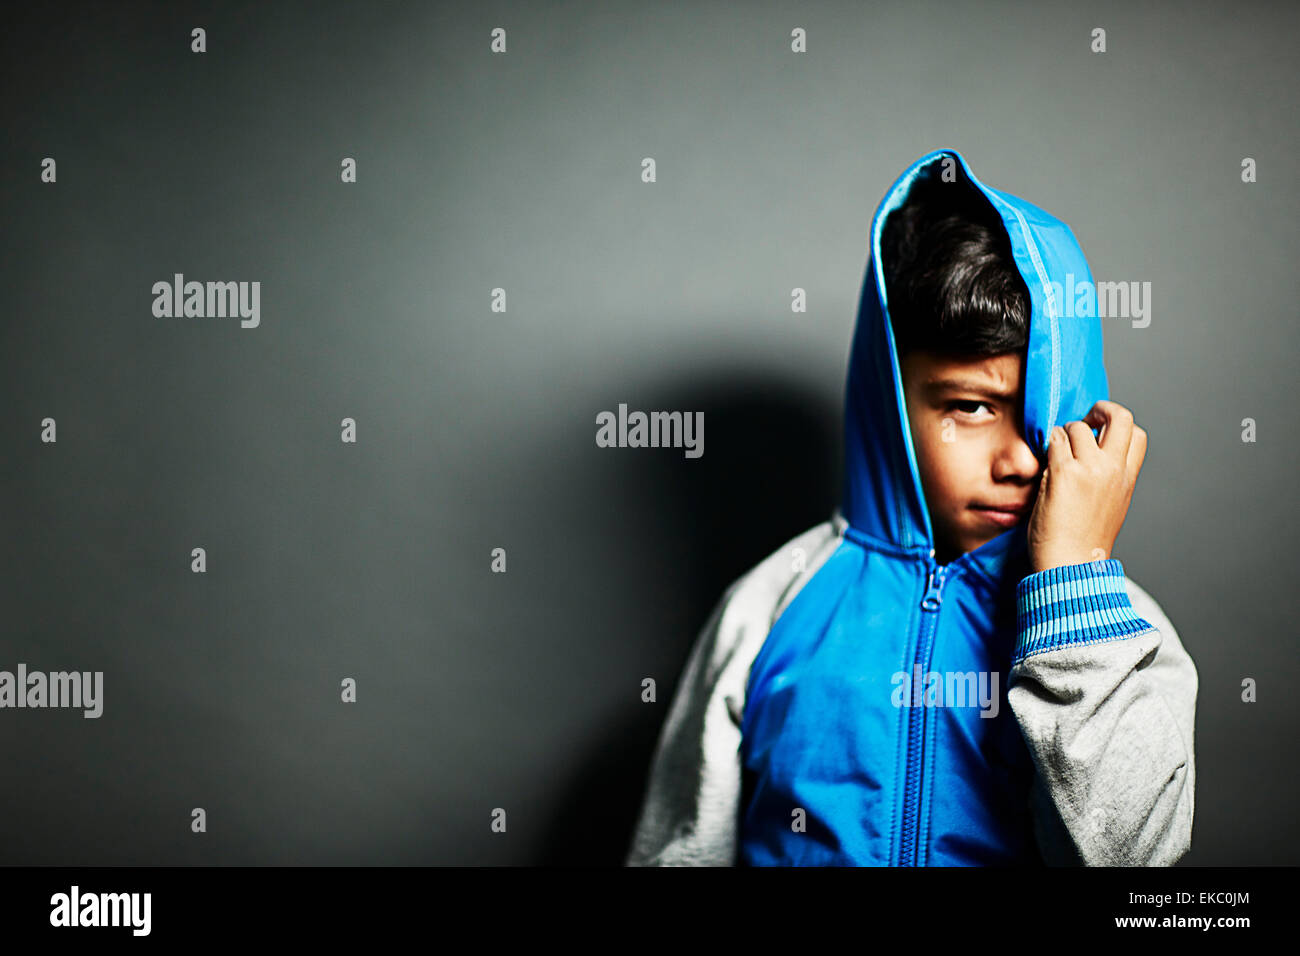 Boy wearing hooded top Banque D'Images